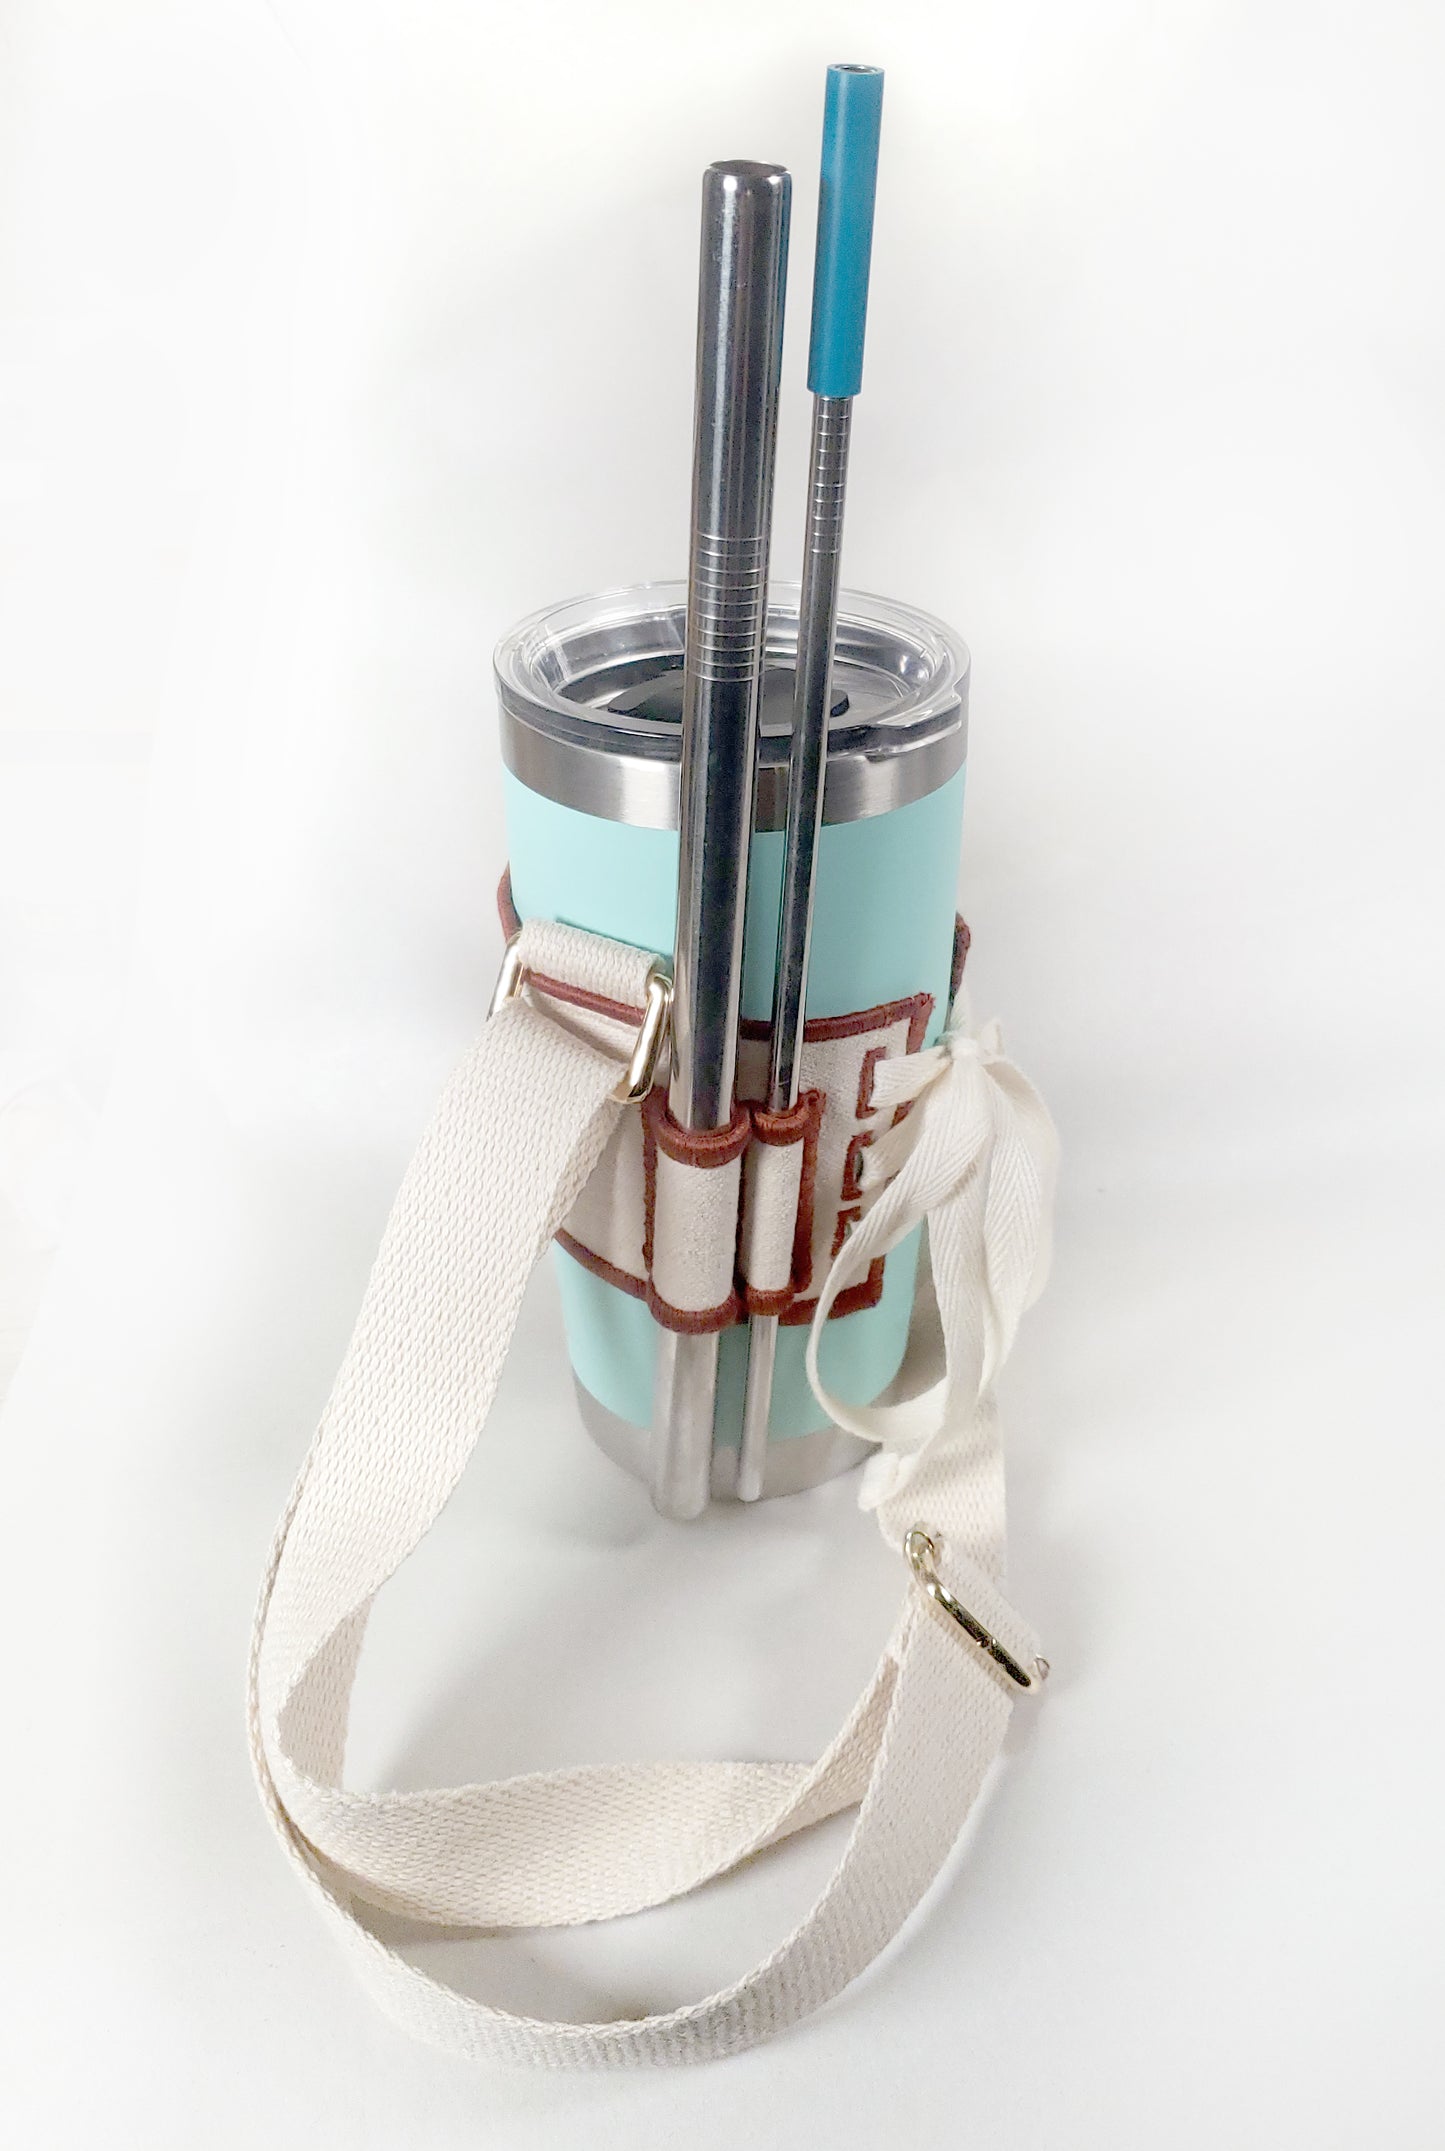 Linen color cloth cup holder with Baker Bunneh as an embroidered patch holding a mint green coffee tumbler and metal straw.